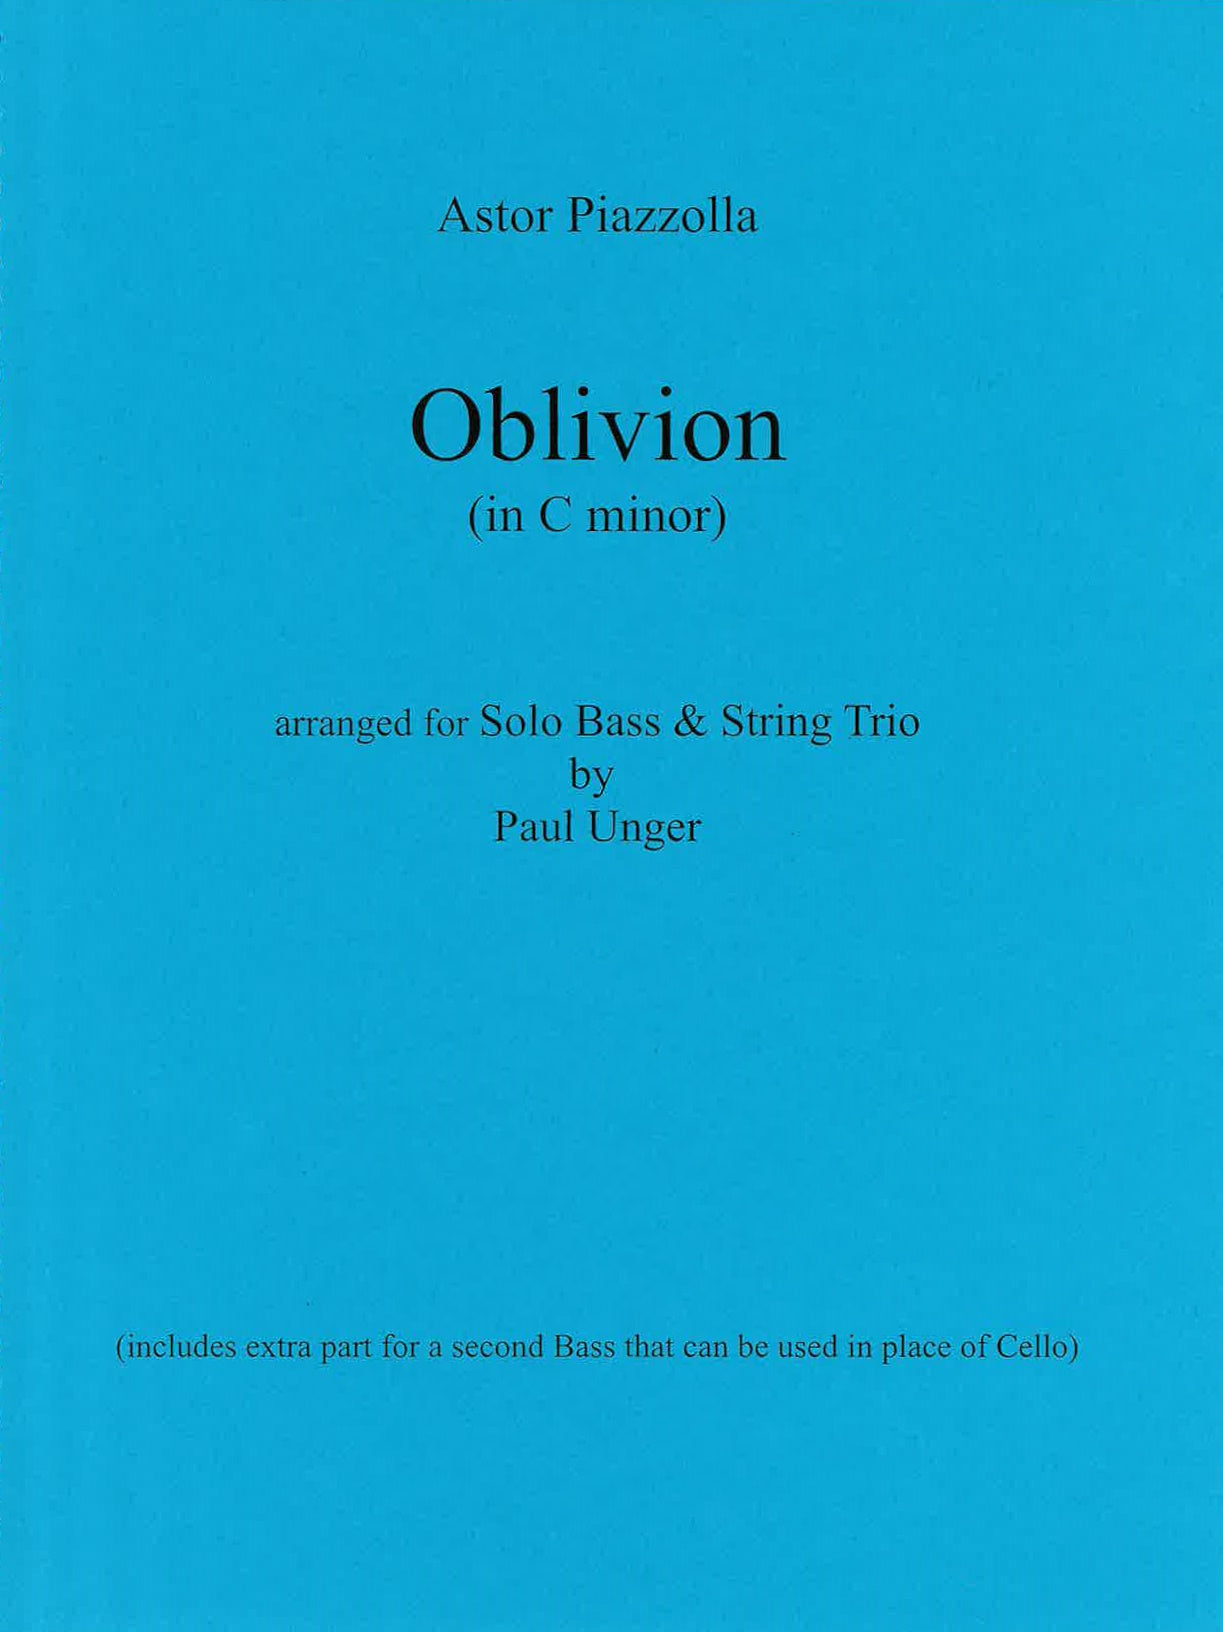 Piazzolla: Oblivion in C minor Arranged by Paul Unger for Bass Quartet